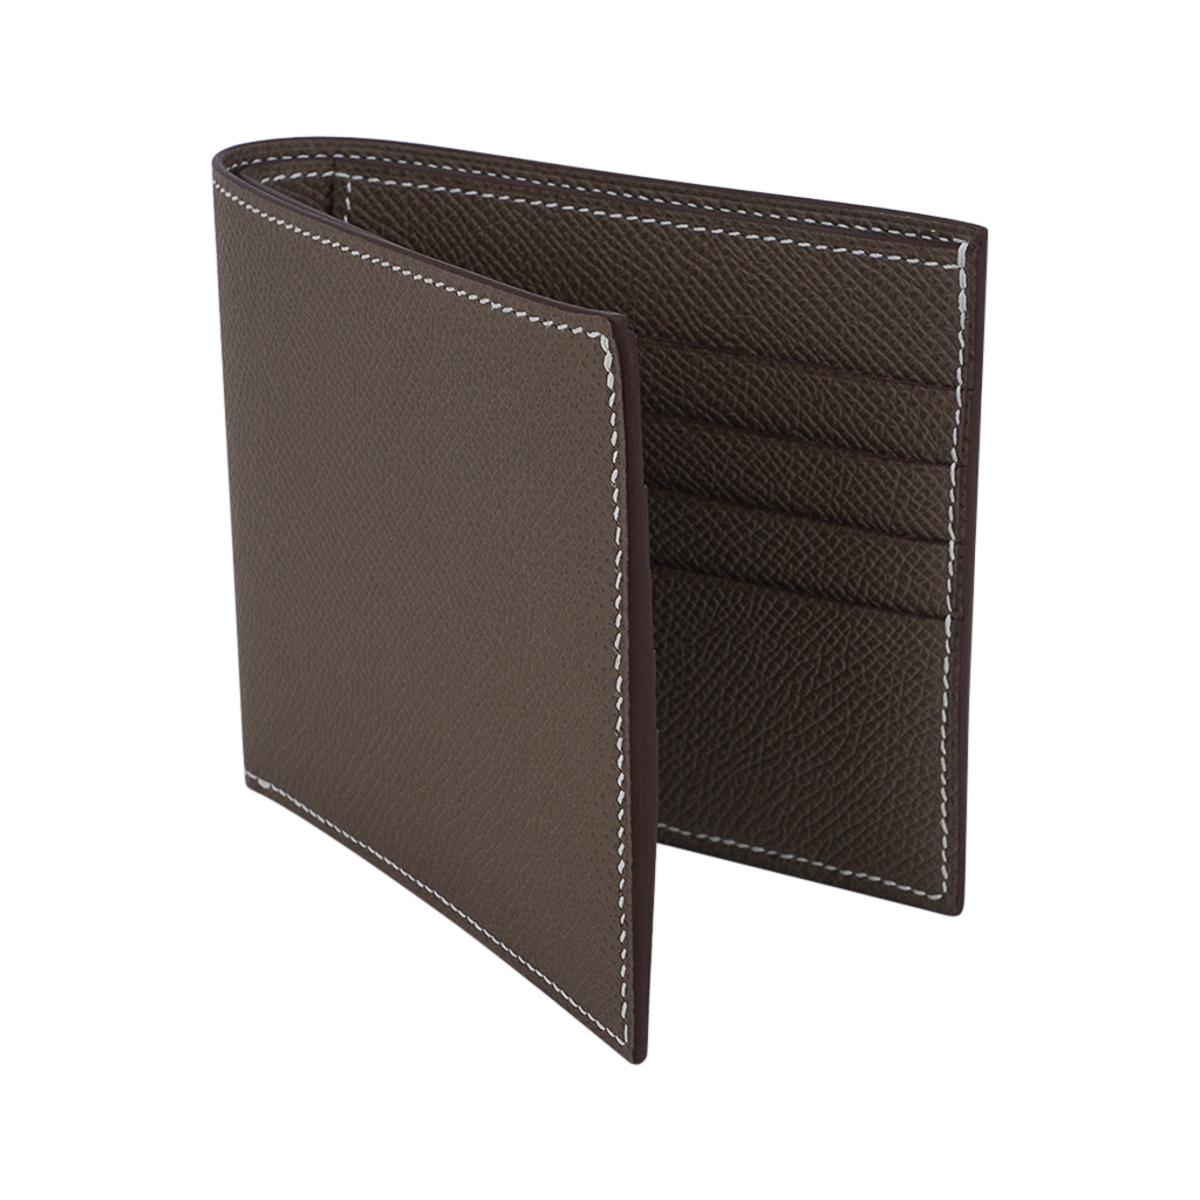 Mightychic offers an Hermes Men's MC2 Copernic compact bi-fold wallet featured in Etoupe.
Light and slim in Epsom leather.
Interior has eight credit card slots, two flat pockets and one paper money slot.
Sleek clean lines.
HERMES Paris Made in